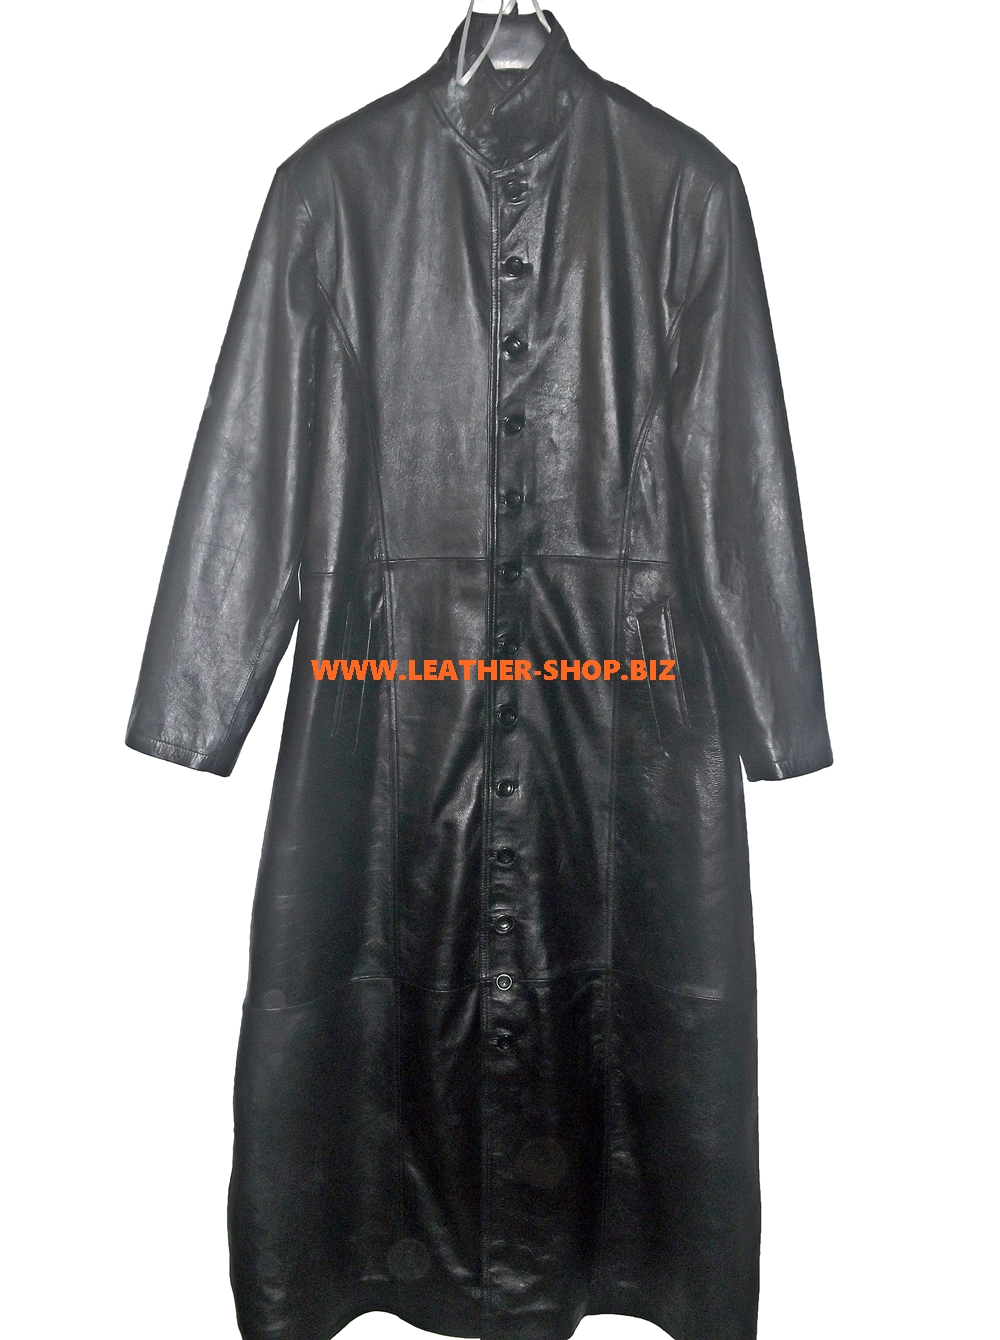 men-s-leather-trench-coat-custom-made-style-mtc555-www.leather-shop.biz-front-image.jpg